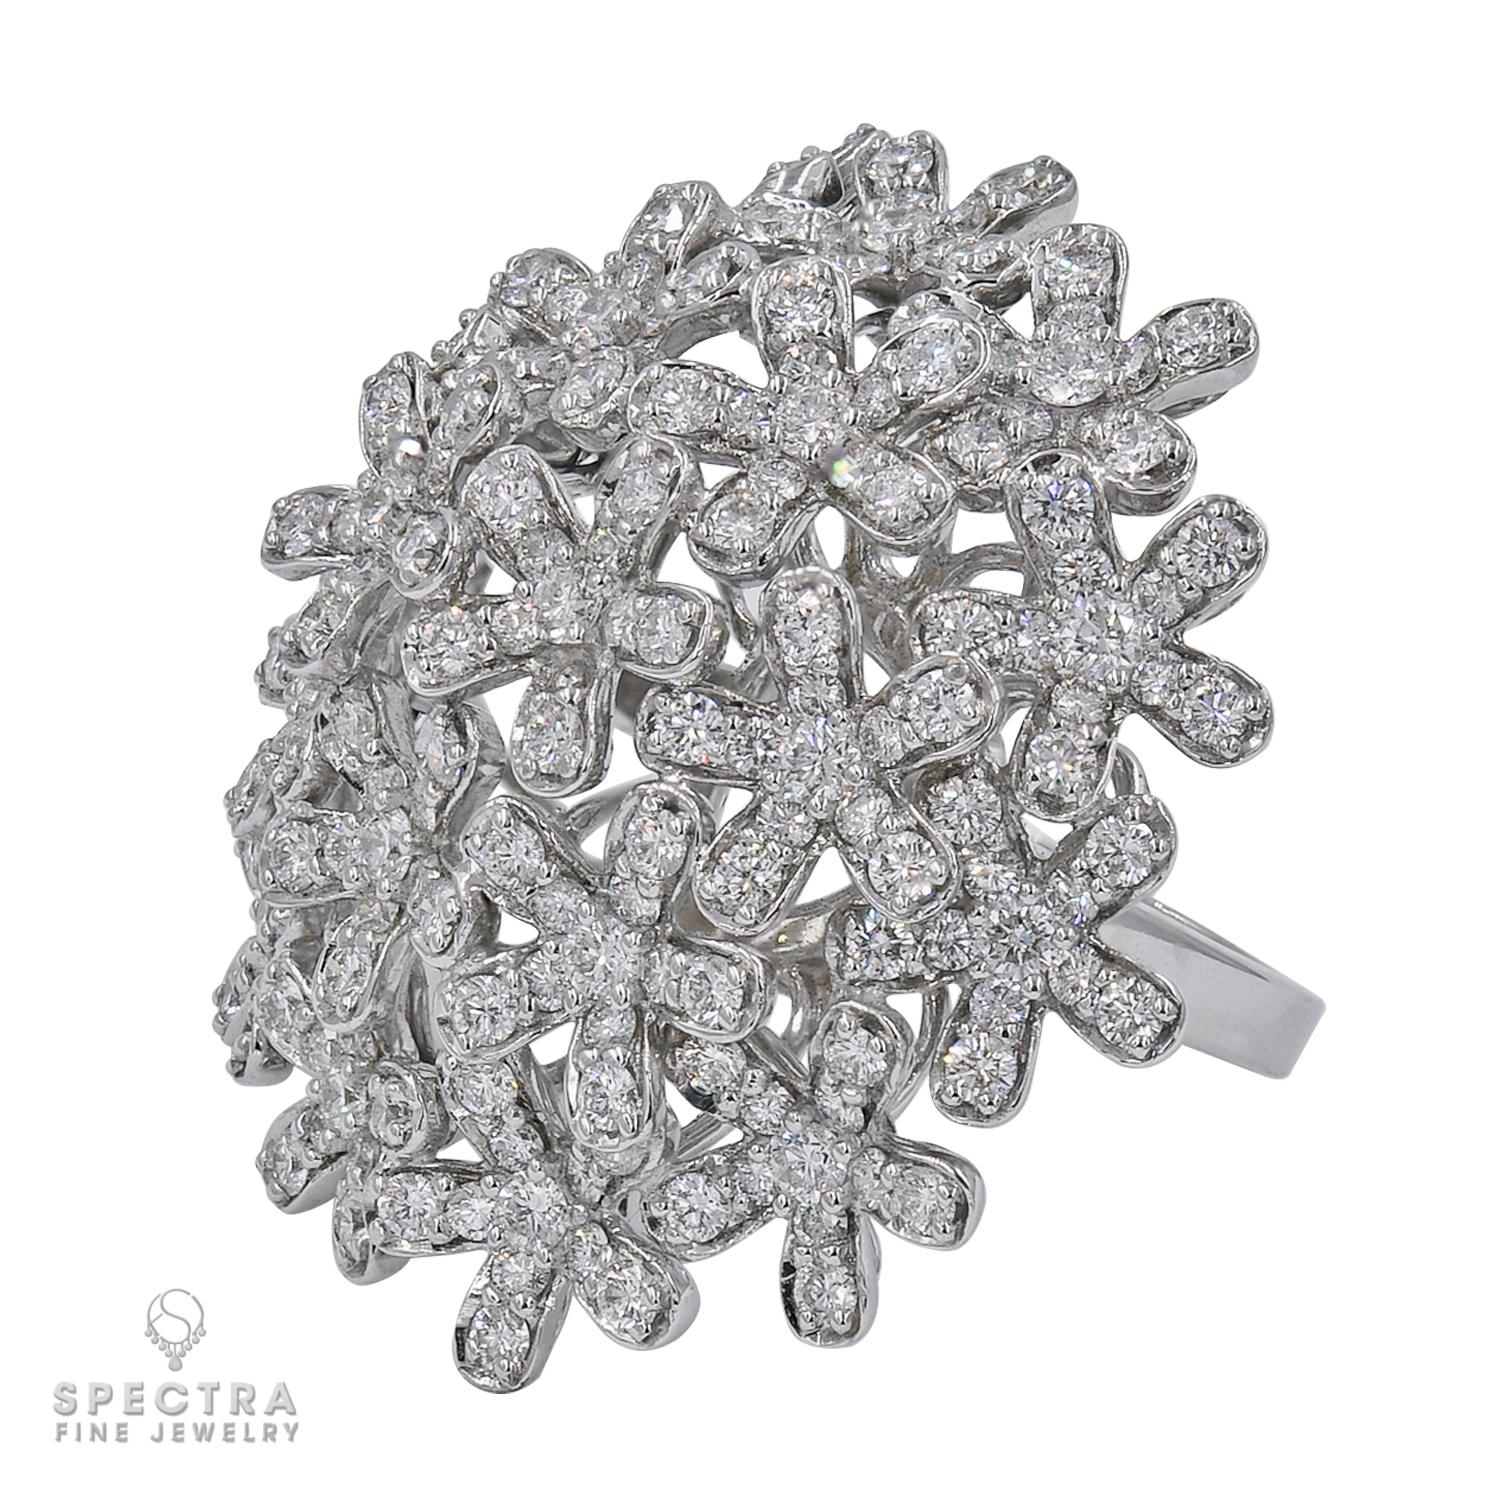 This dazzling Van Cleef & Arpels ring from the impressive Socrate collection features a delicate sparkling floral bouquet crafted in 18k white gold and set with 132 brilliant-cut round diamonds of an estimated 2.64 carats. 
Made in France circa